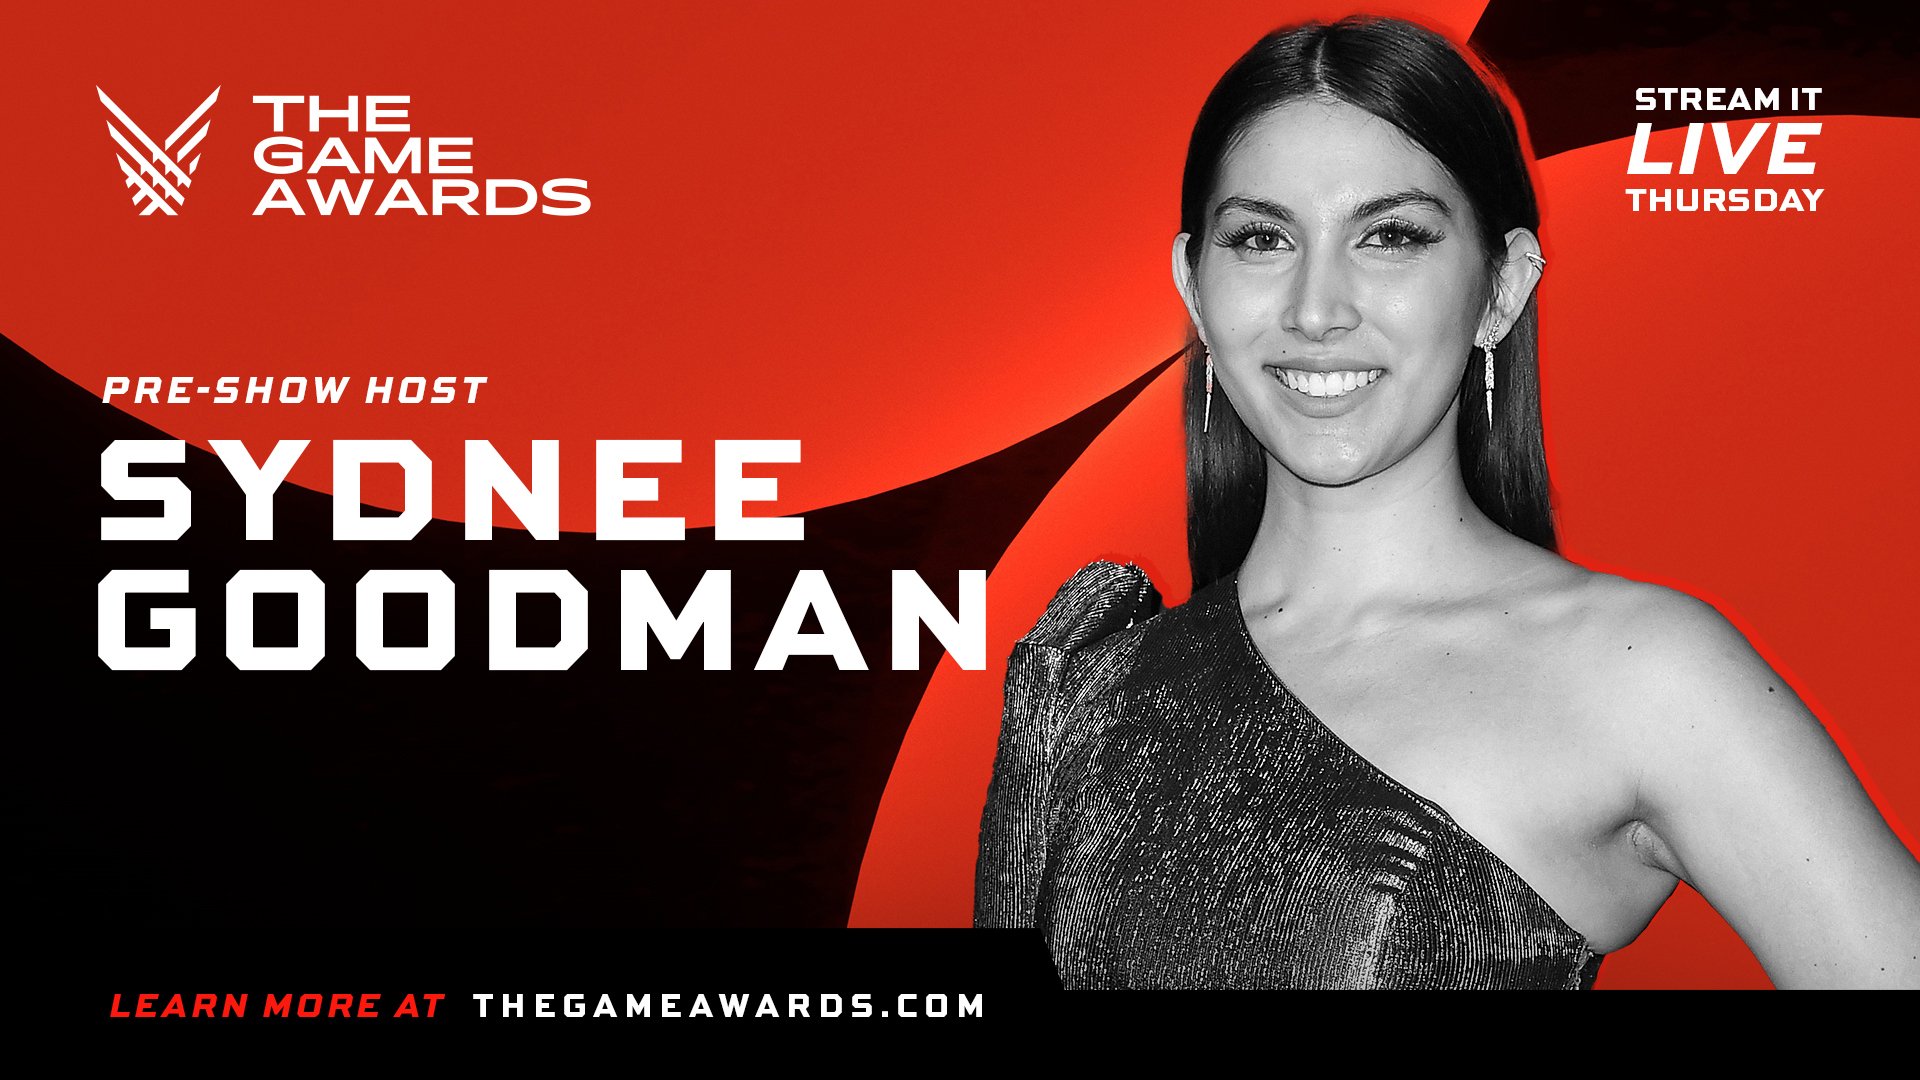 The Game Awards on X: It's official: Sydnee Goodman is back as your host  for #TheGameAwards live pre-show on Thursday. Sydnee will be revealing more  than 10 world premieres as we get